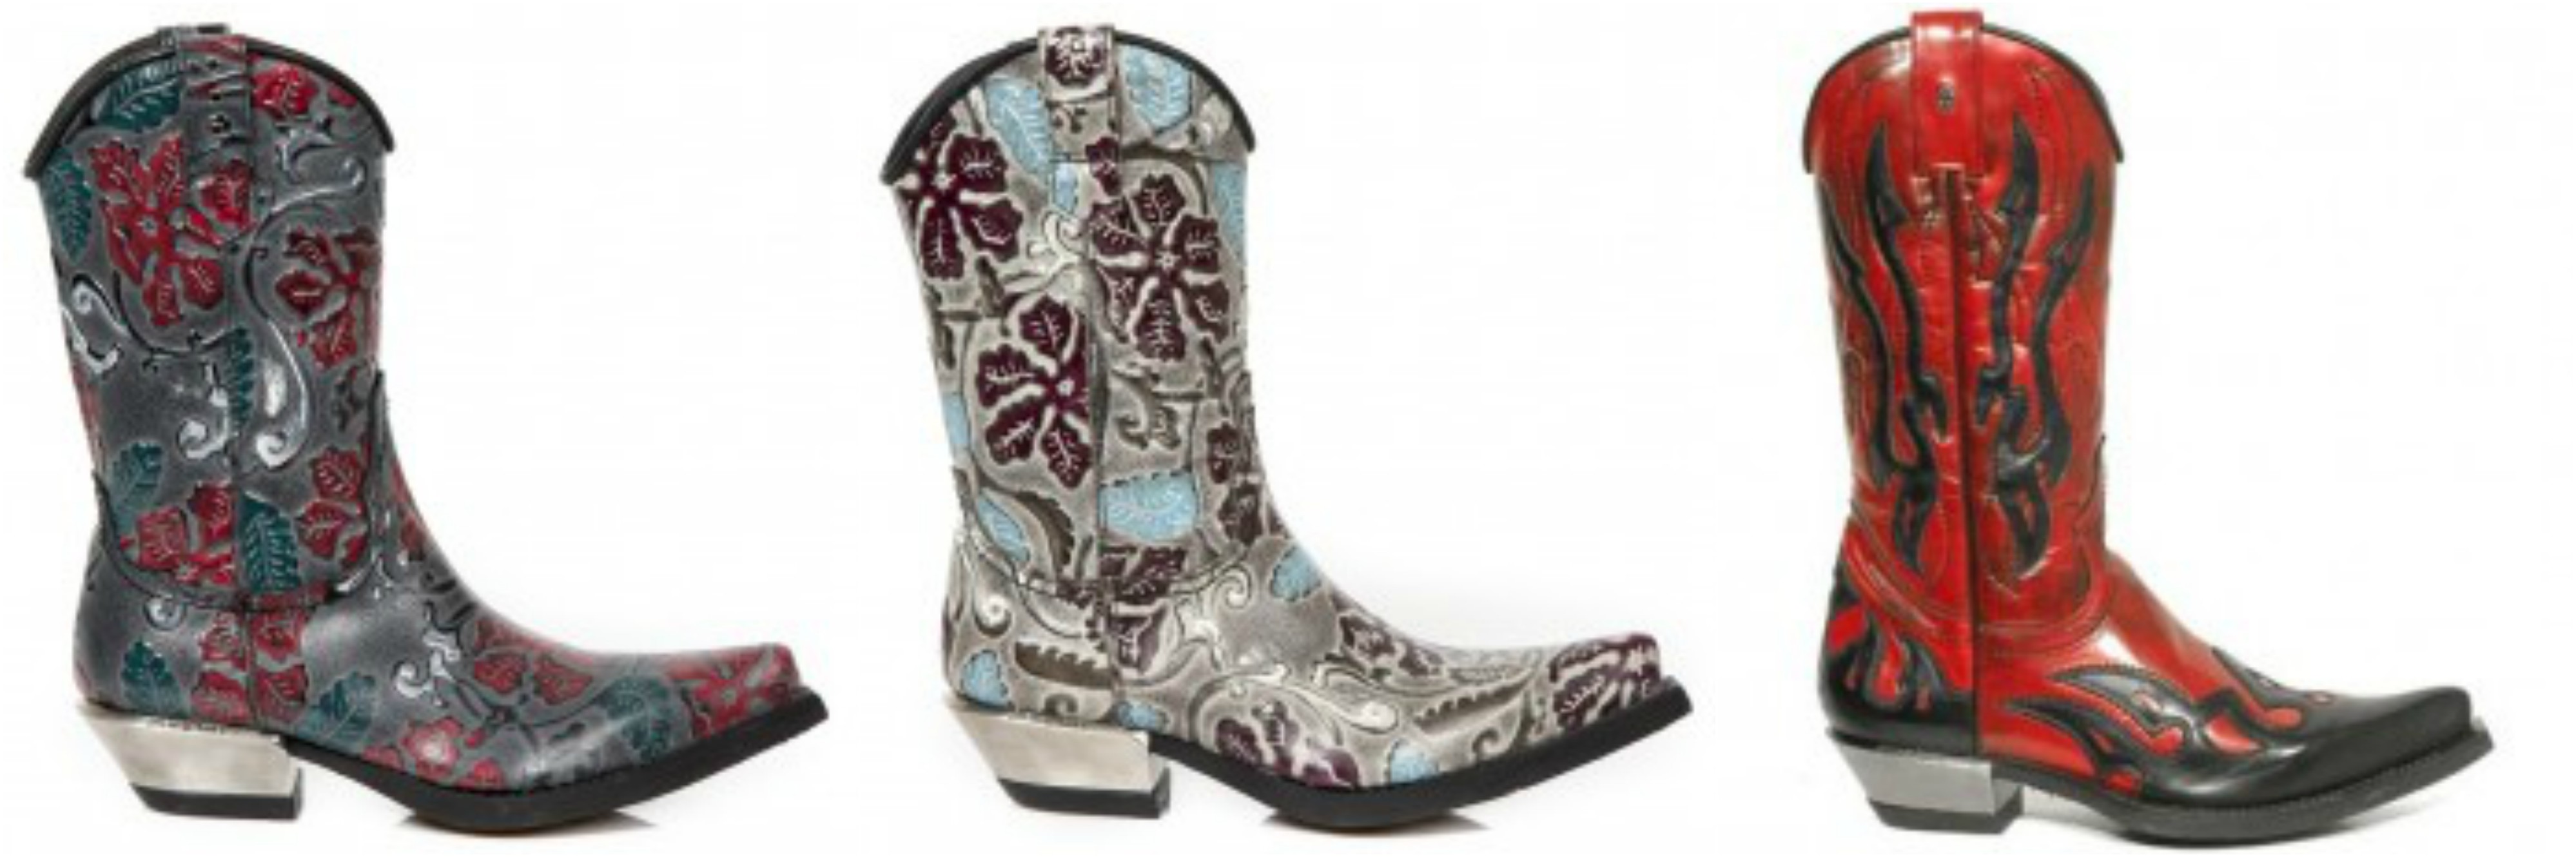 Cowboy Boots Style